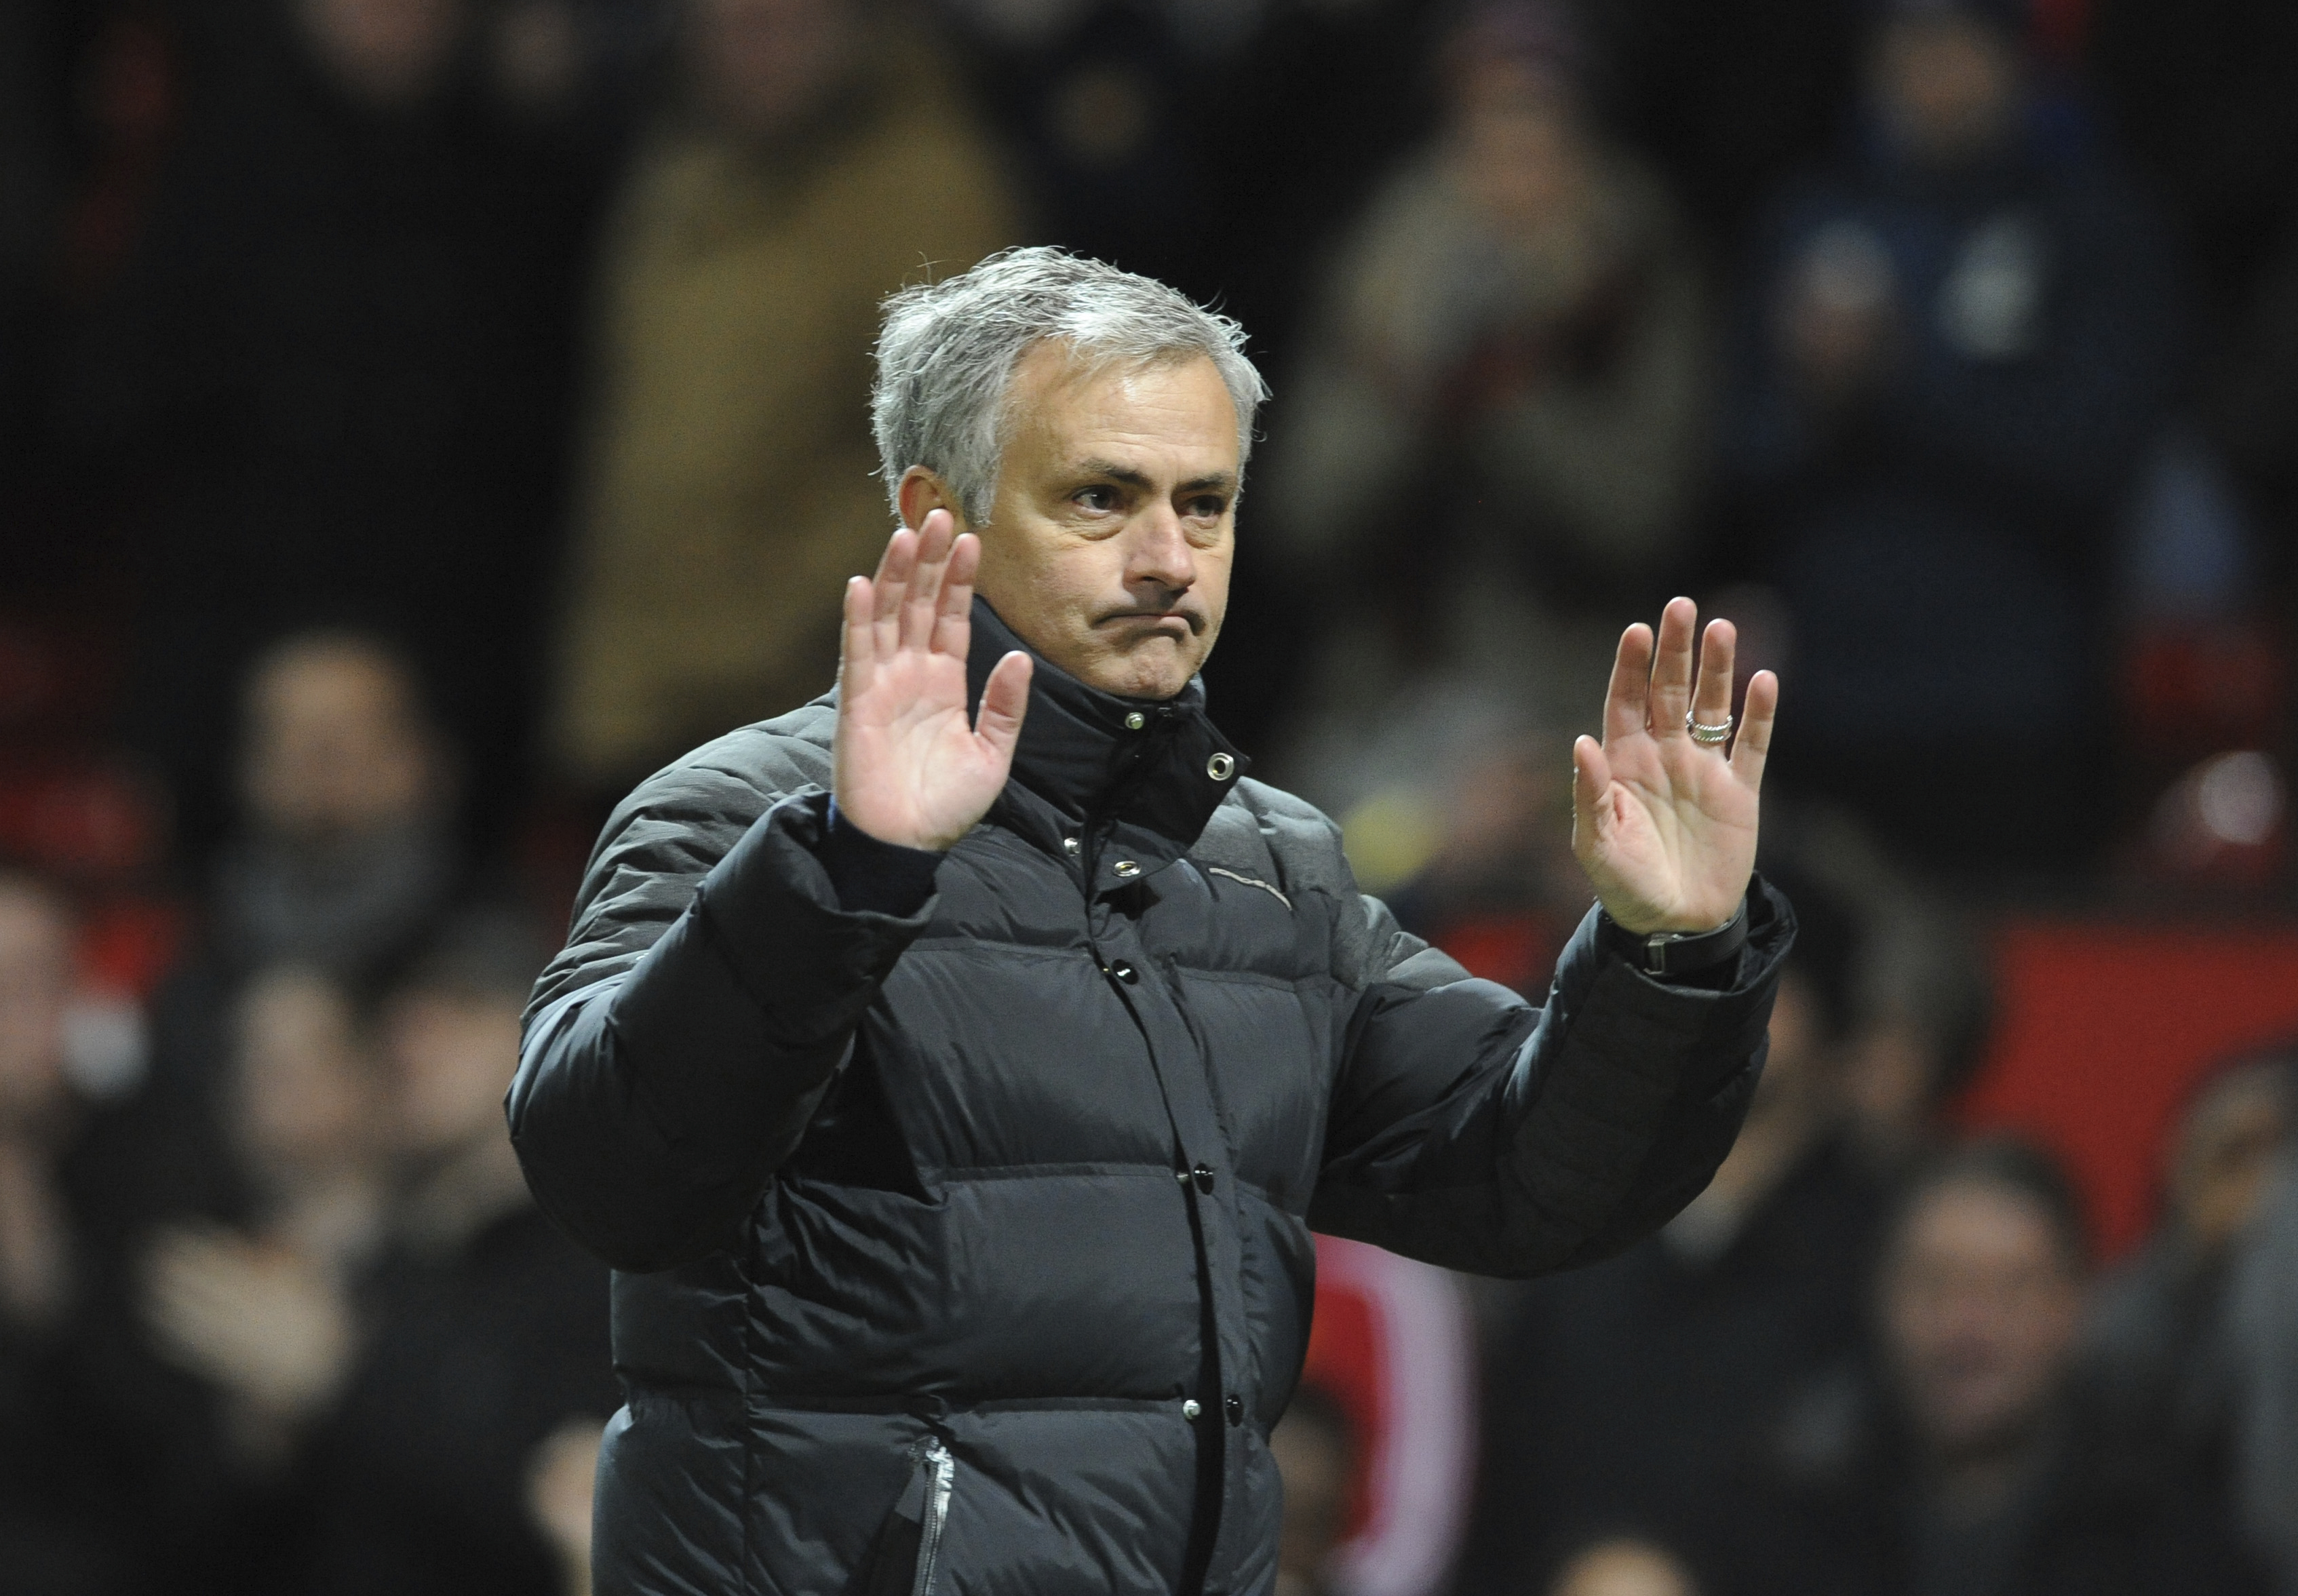 Manchester United manager Jose Mourinho waves to fans after the final whistle during the English Premier League soccer match between Manchester United and Sunderland at Old Trafford in Manchester, England, Monday, Dec. 26, 2016. AP